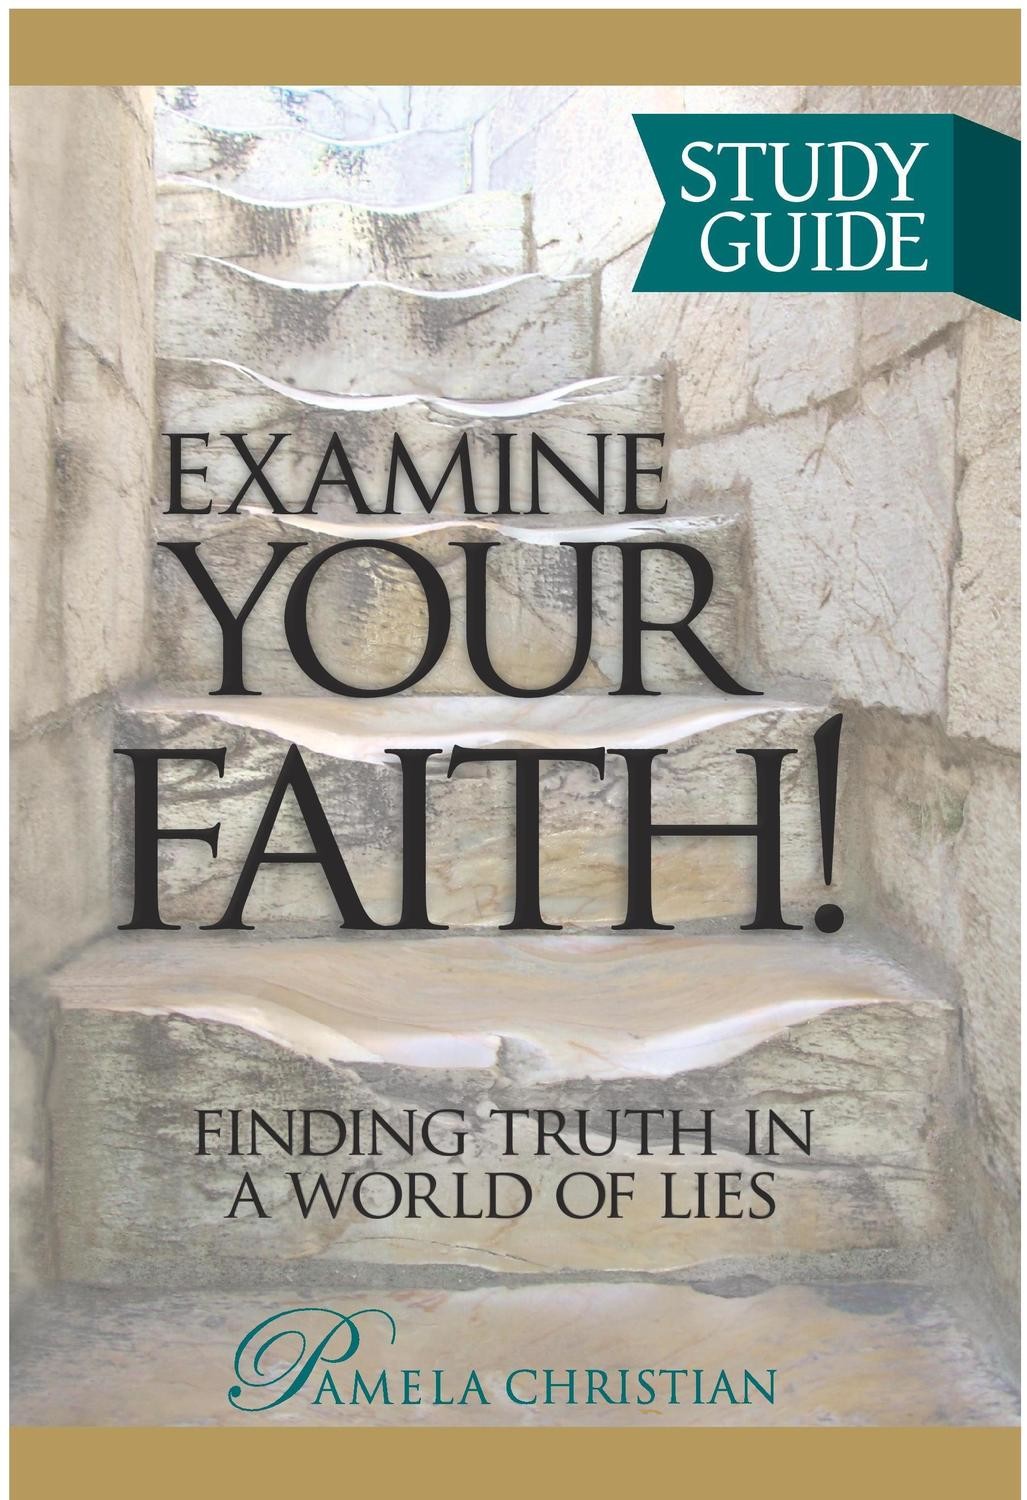 Examine Your Faith! Finding Truth in a World of Lies Study Guide